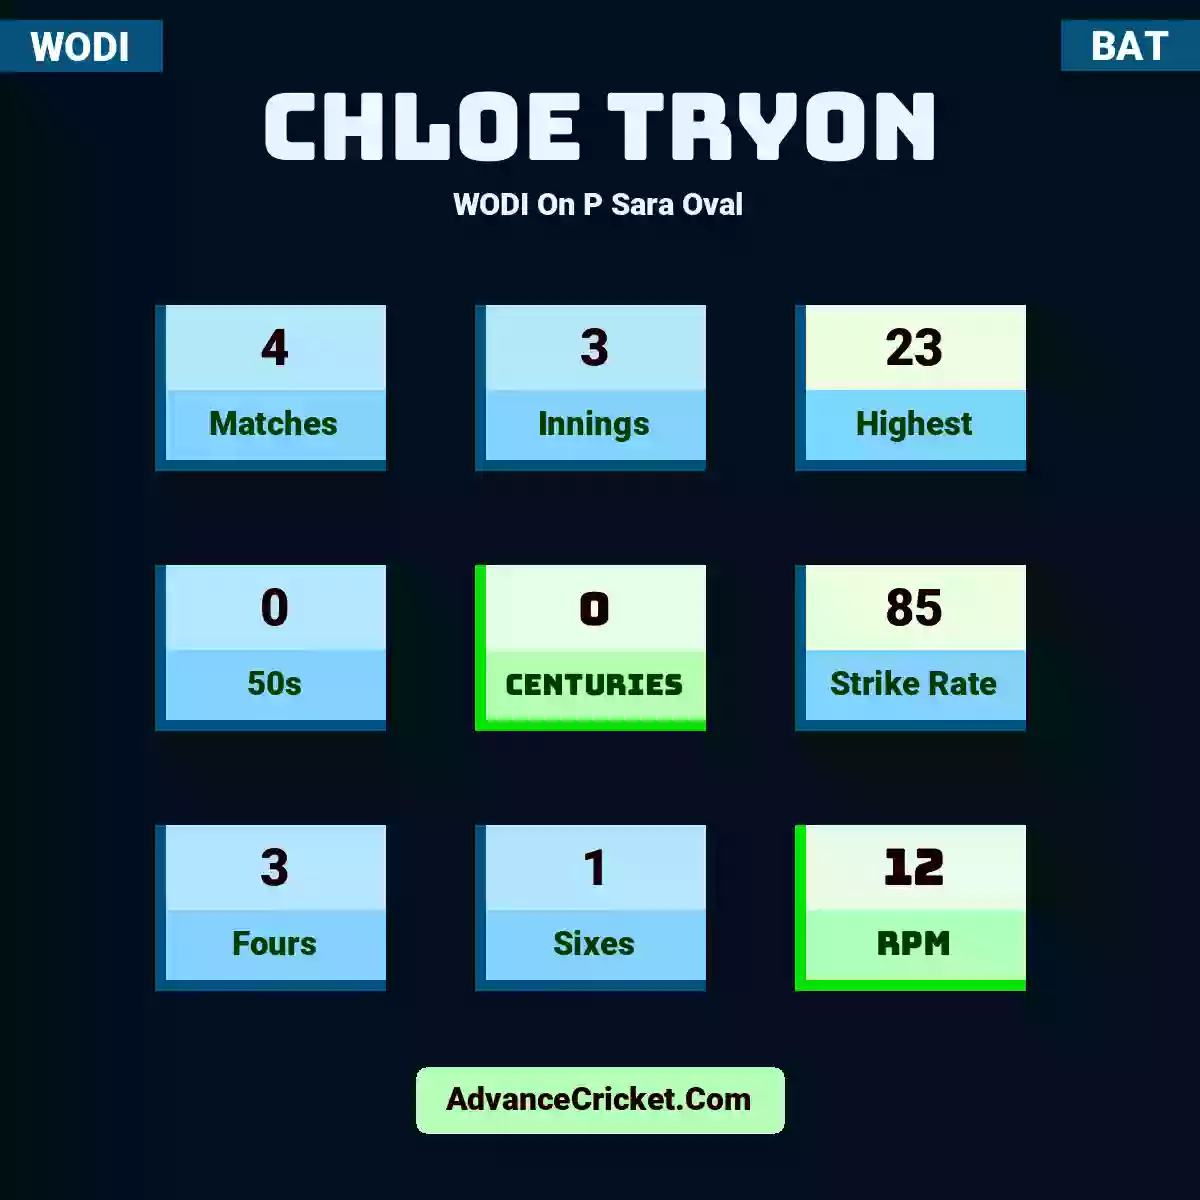 Chloe Tryon WODI  On P Sara Oval, Chloe Tryon played 4 matches, scored 23 runs as highest, 0 half-centuries, and 0 centuries, with a strike rate of 85. C.Tryon hit 3 fours and 1 sixes, with an RPM of 12.